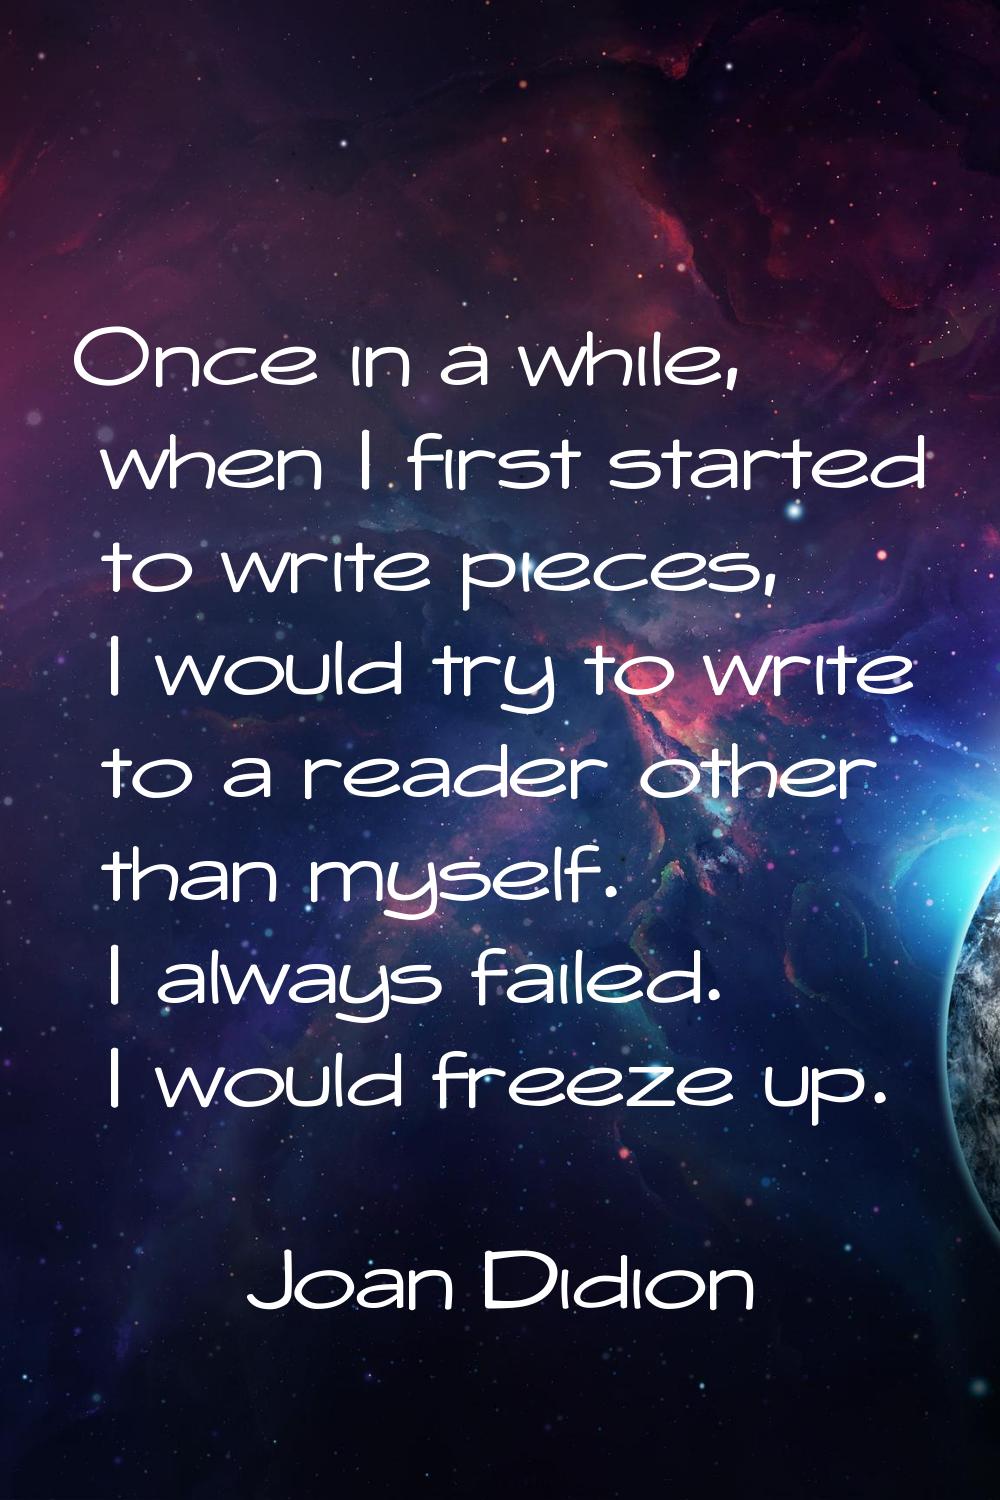 Once in a while, when I first started to write pieces, I would try to write to a reader other than 